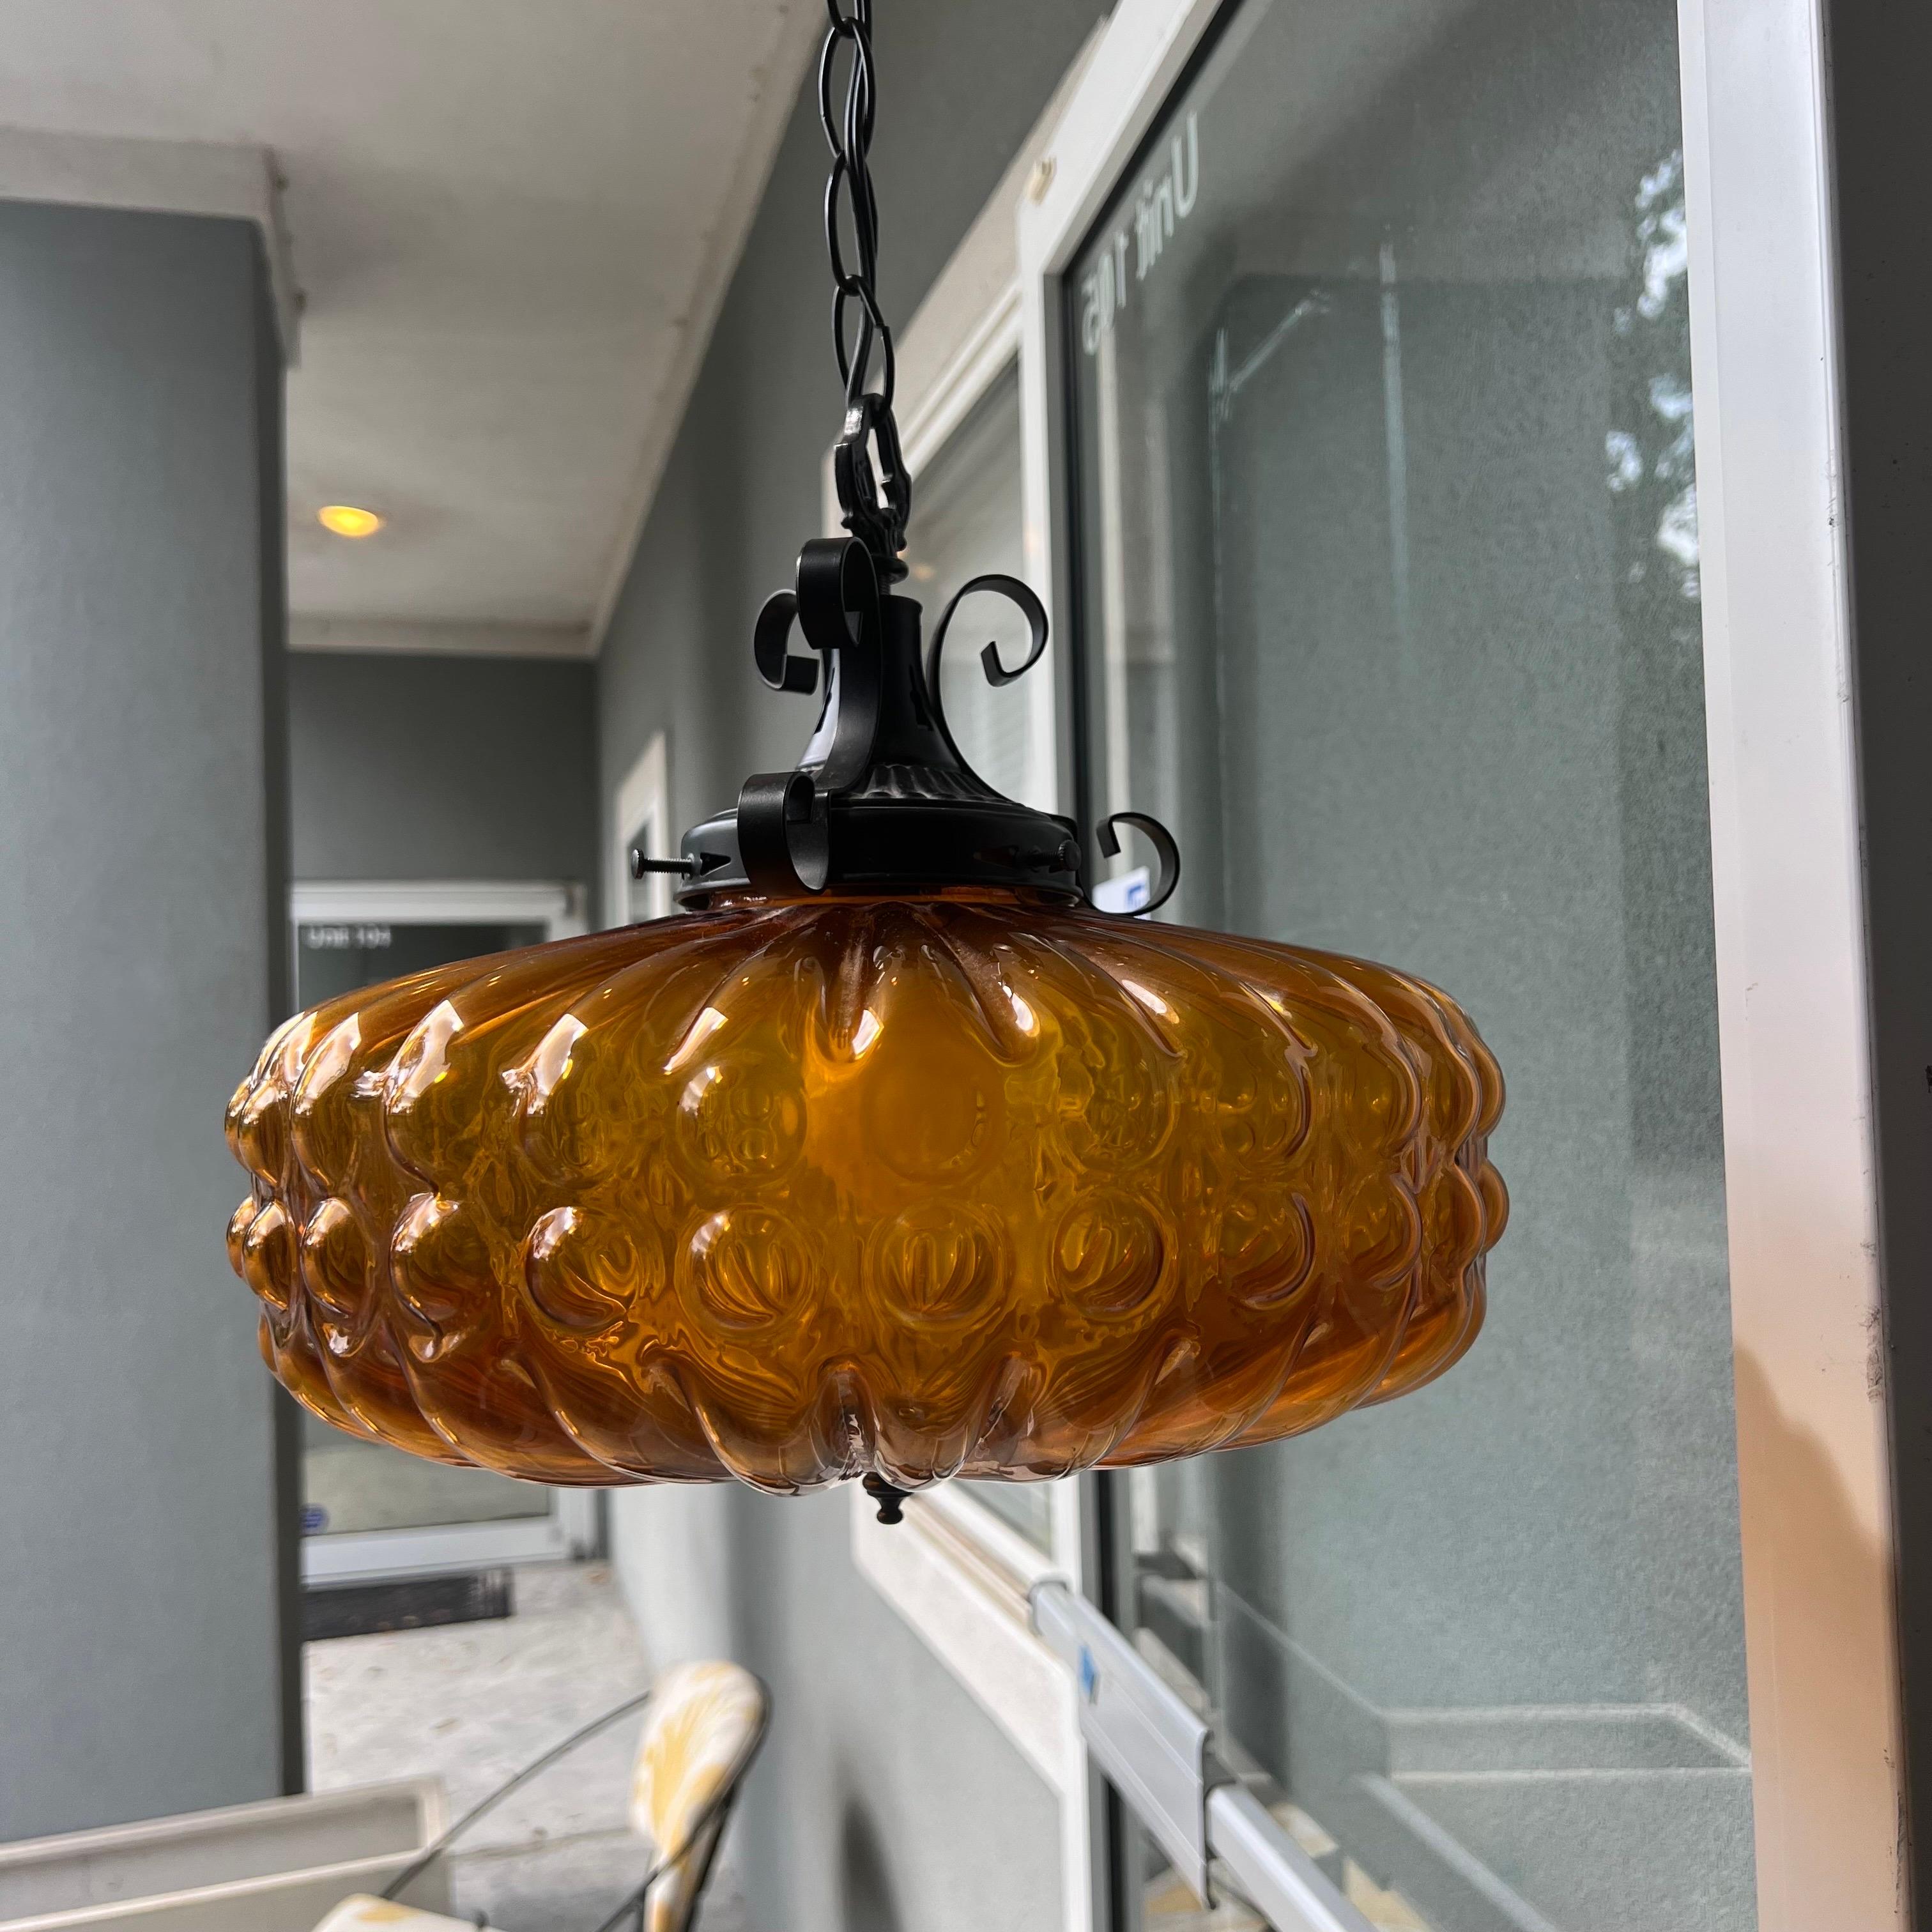 A fabulous large bubble glass pendant light with scroll work metal details on the top.  Mid-Century era with a Spanish revival twist.  This pendant light is big enough to use as a chandelier in a small entrance, over a kitchen table, etc.  